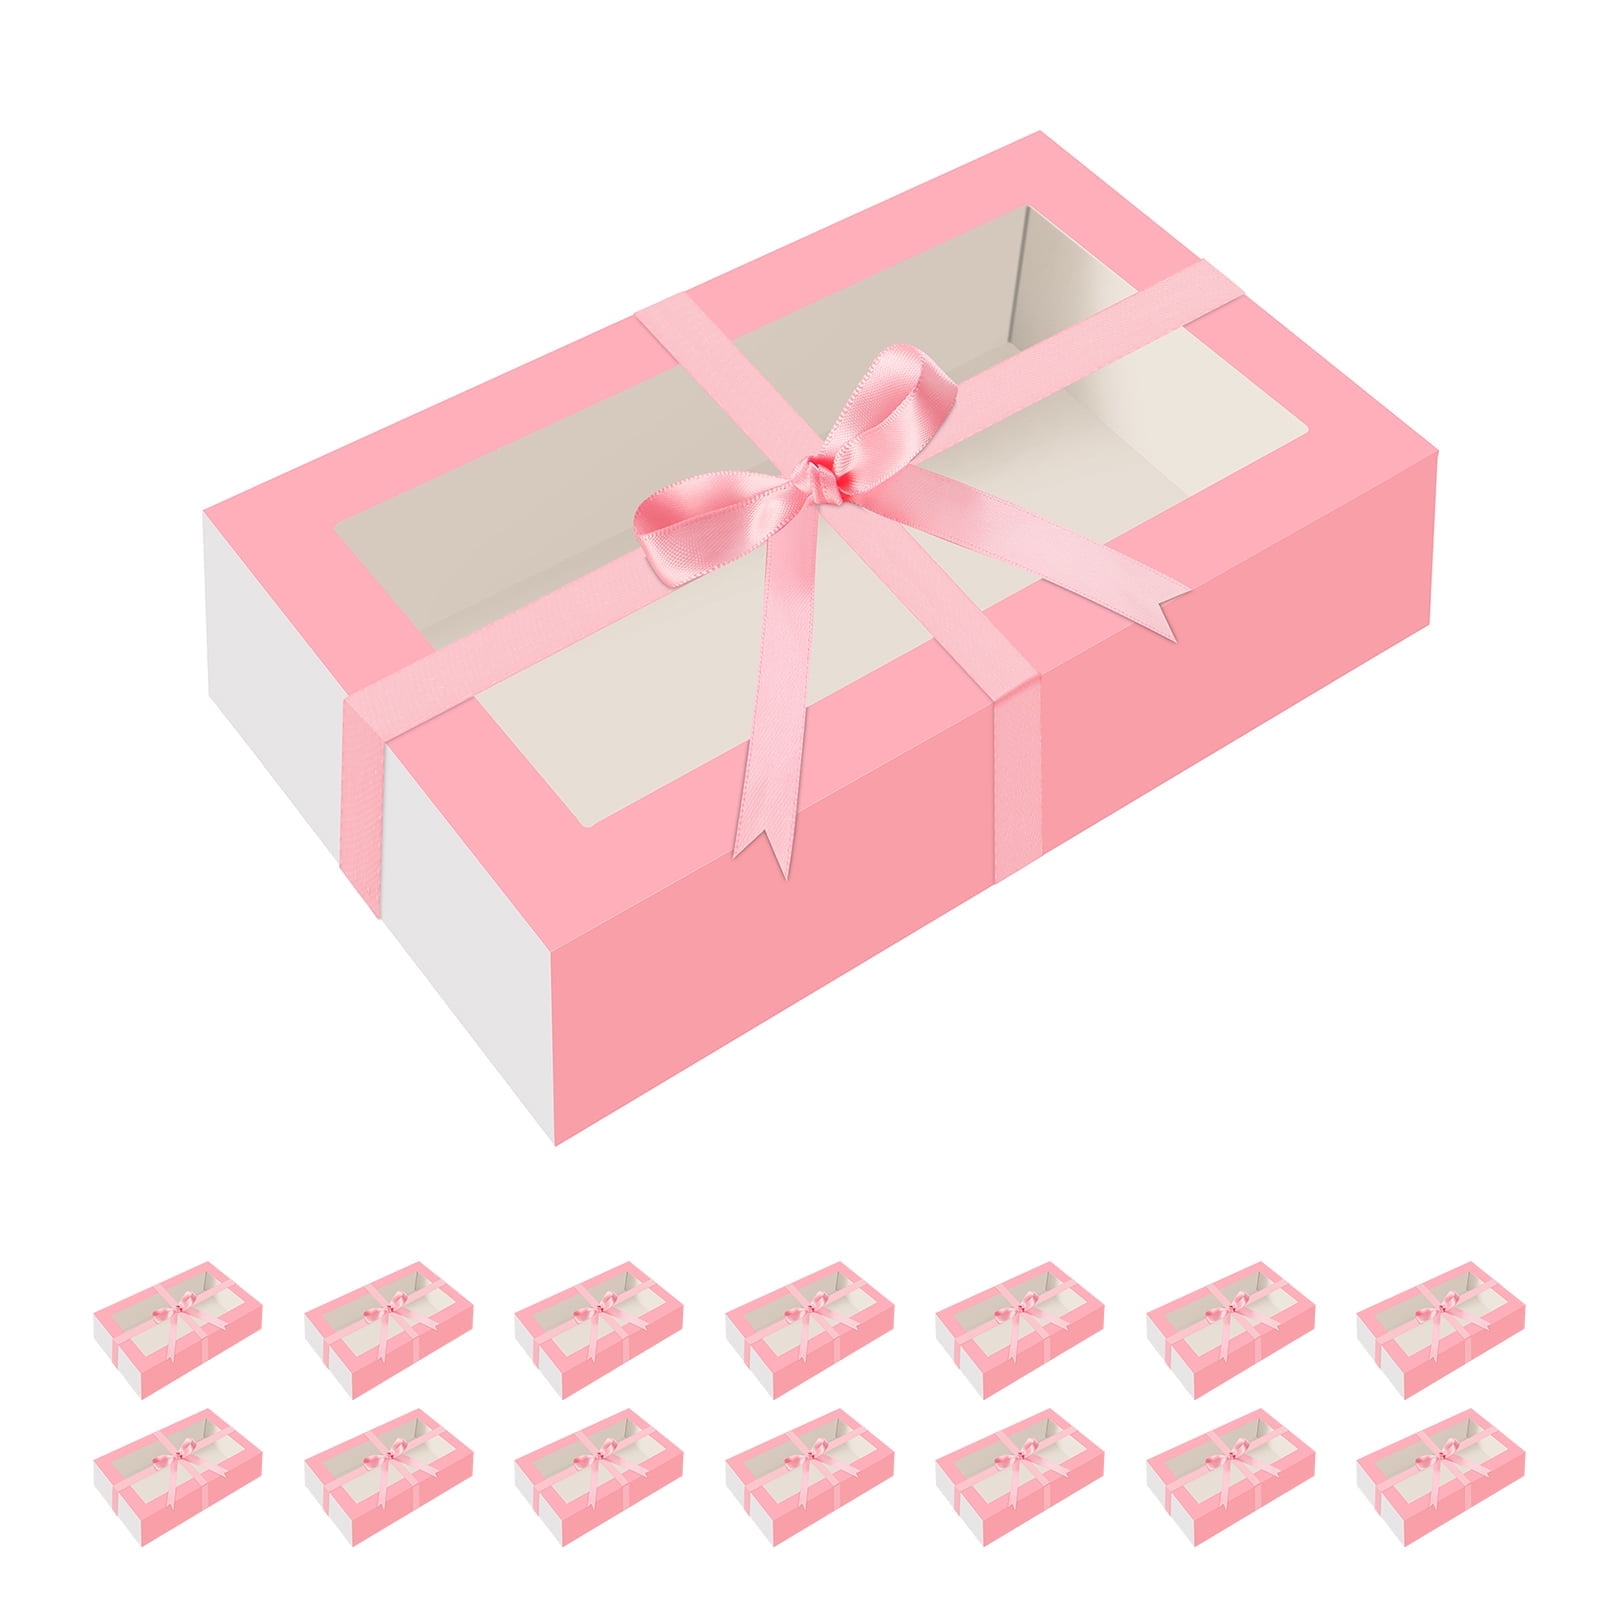 PACKHOME 15 Pack Macaron Boxes for 12, Pink Macaron Packaging Boxes ...